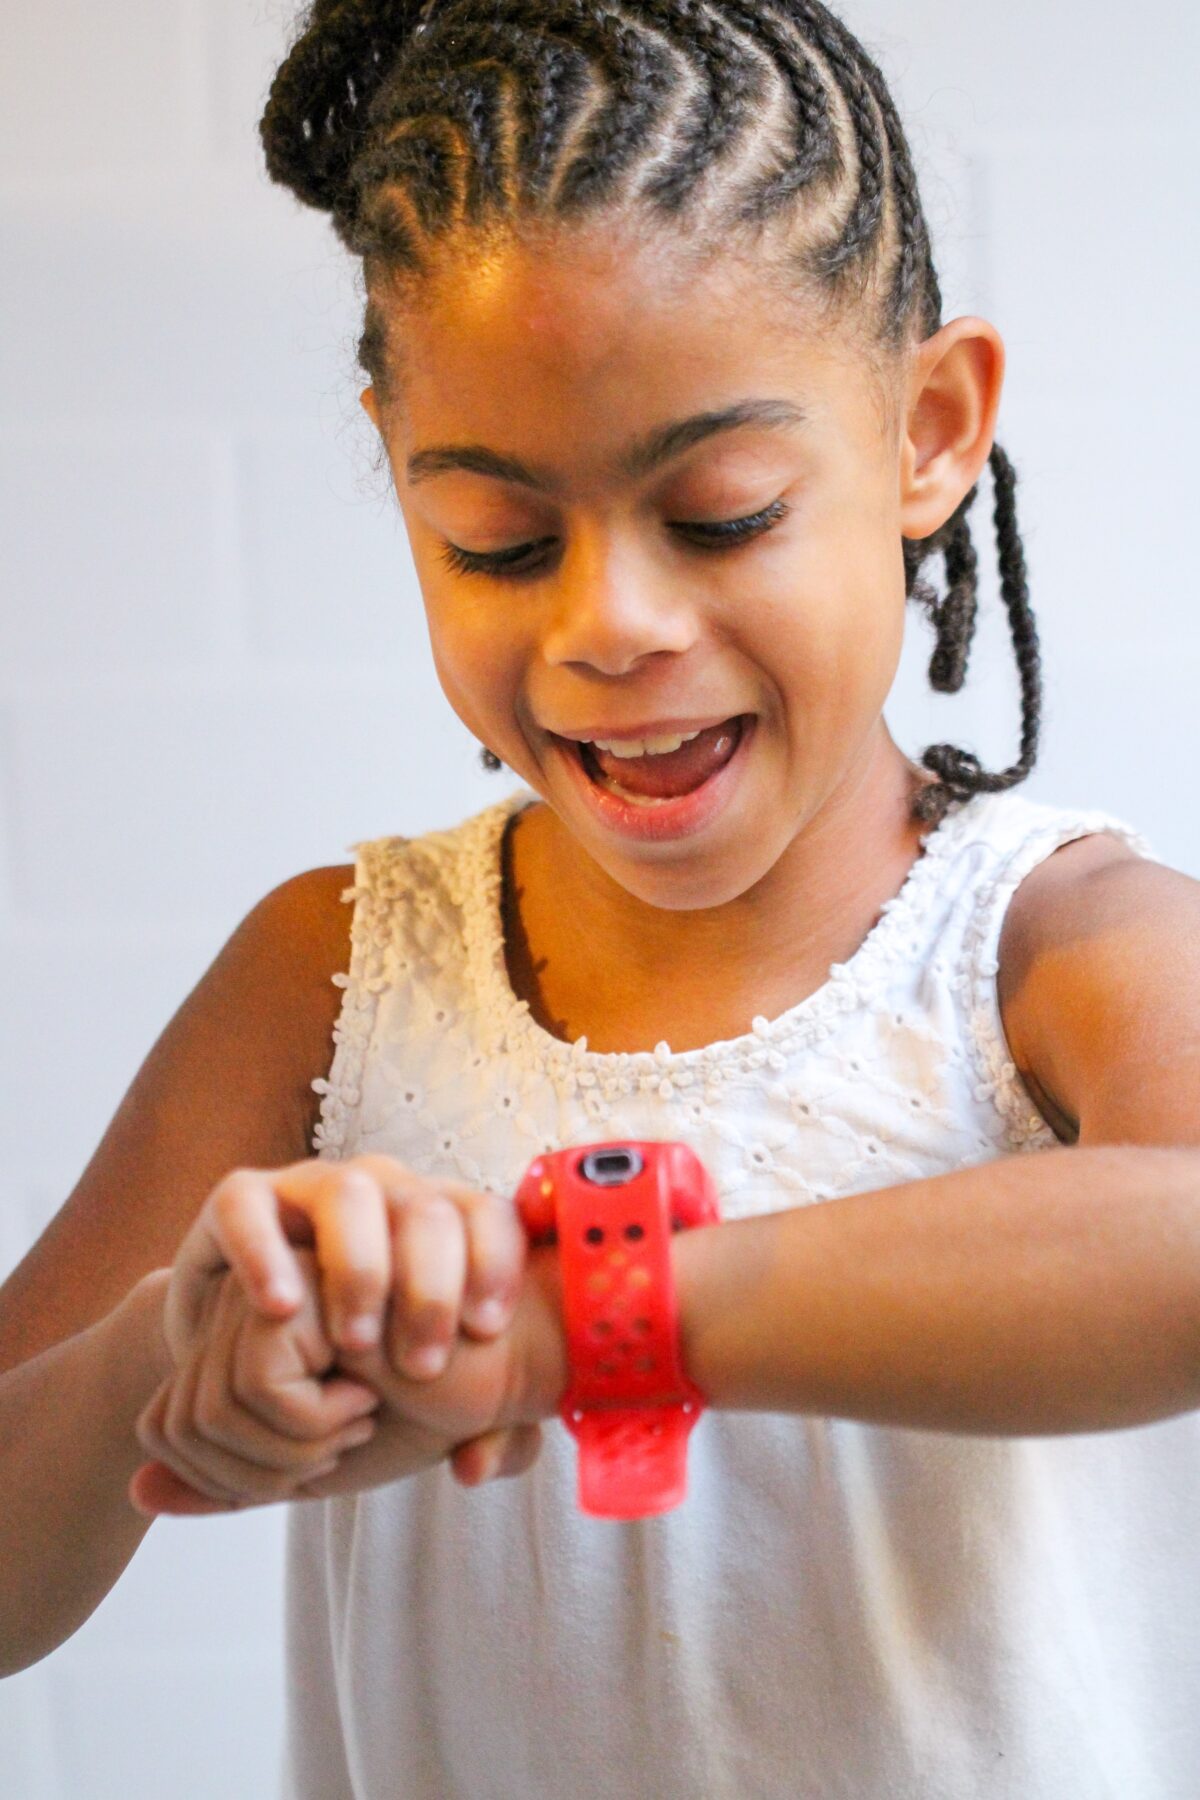 The Tobi™ 2 Robot Smartwatch is a must-have for kids who want to keep up with the latest in technology - with tons of cool features!